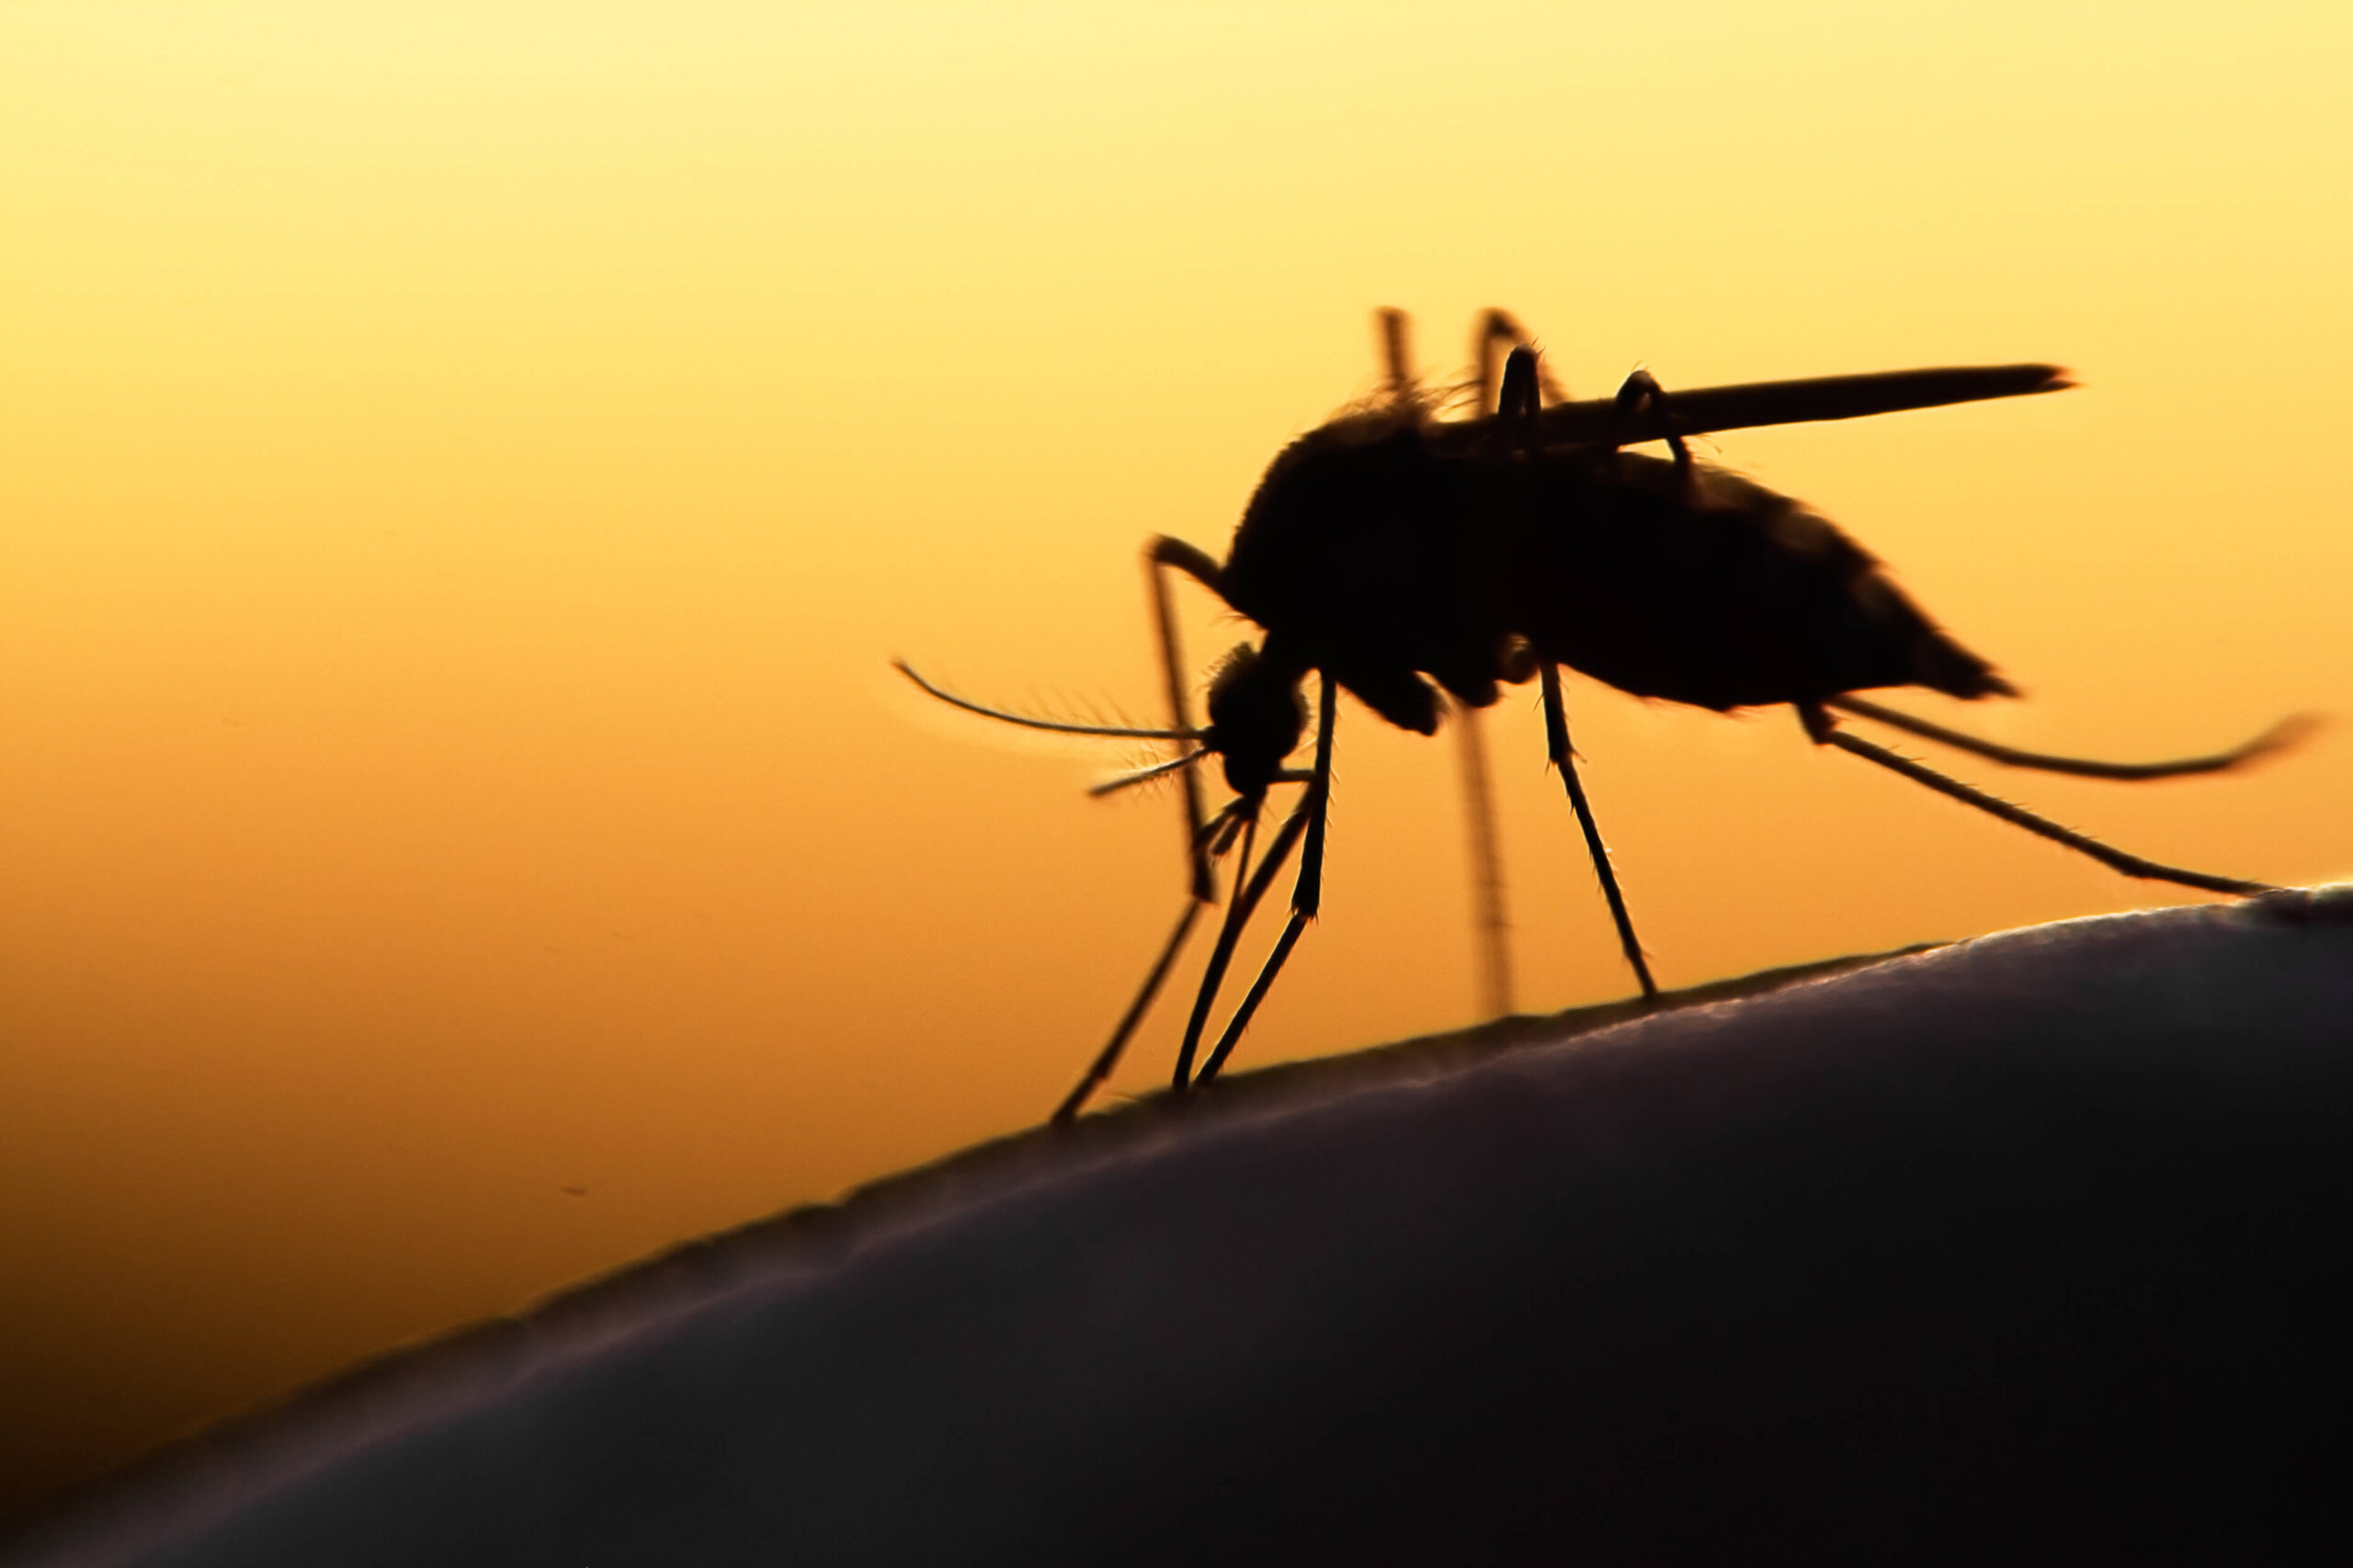 More mosquitos: a potential consequence of climate change